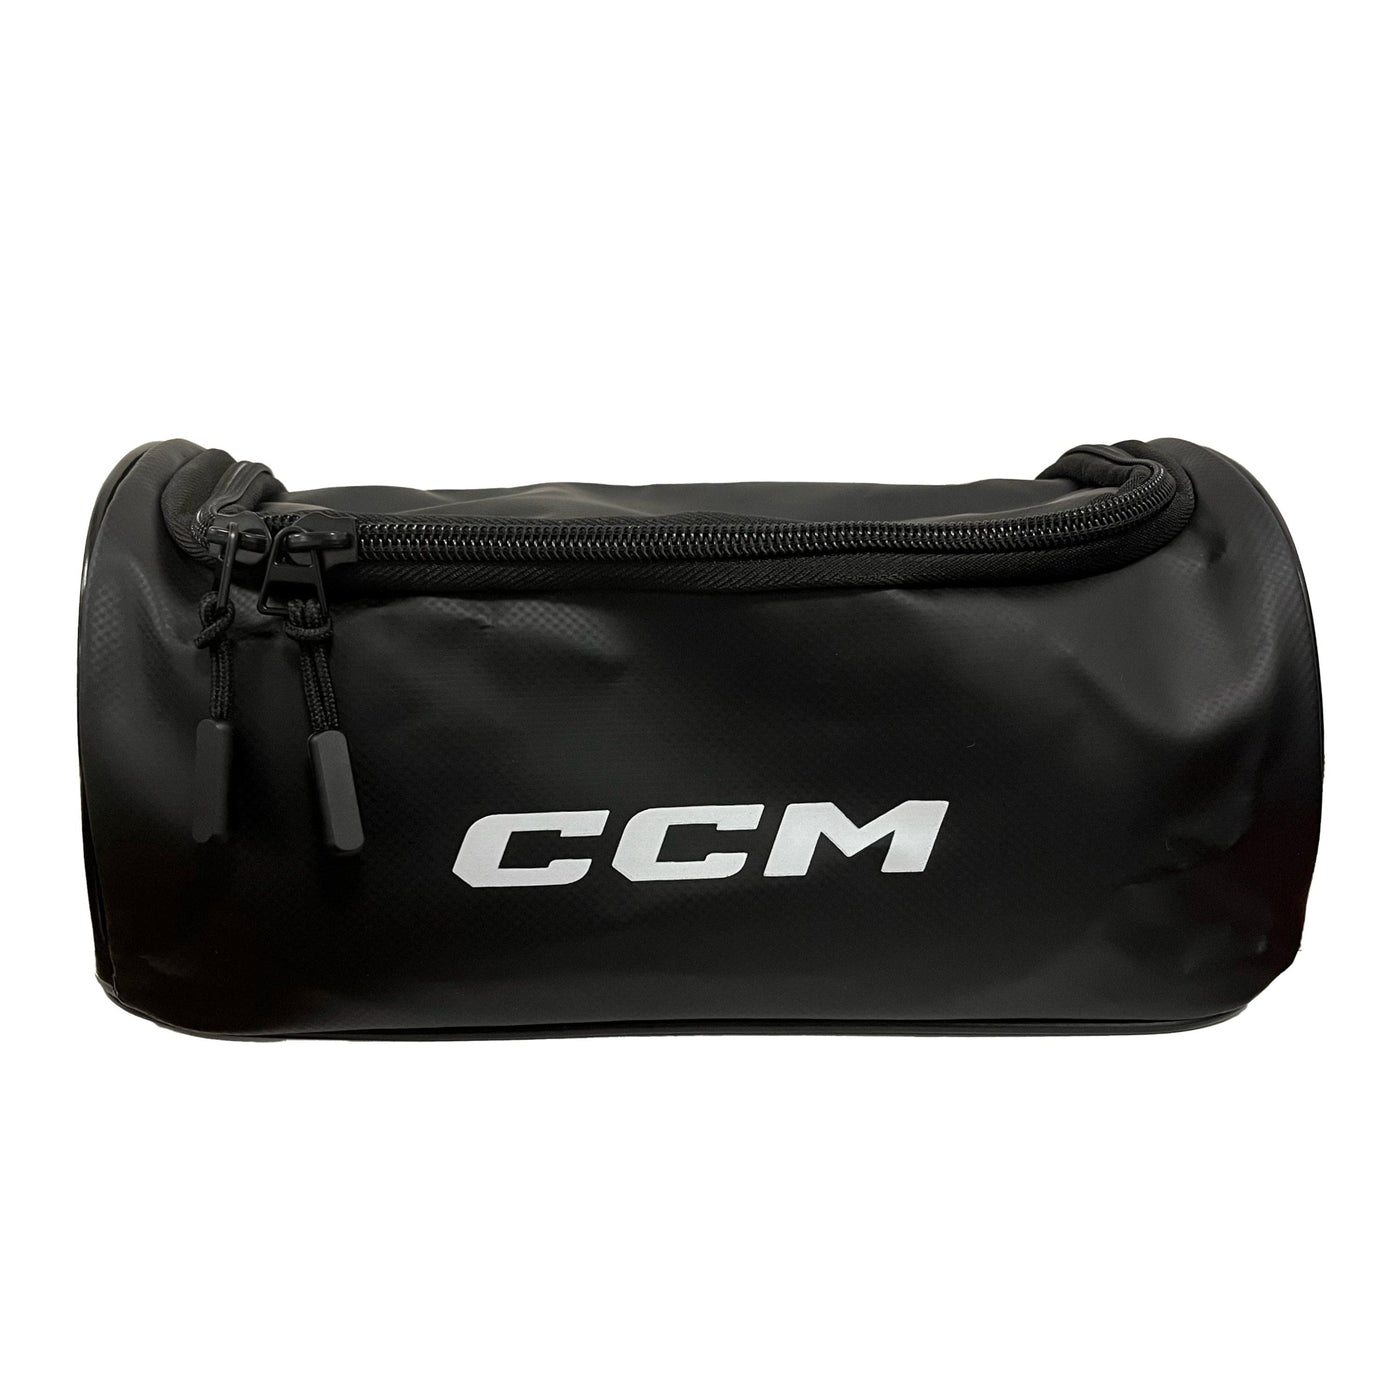 CCM Toiletry Bag - The Hockey Shop Source For Sports